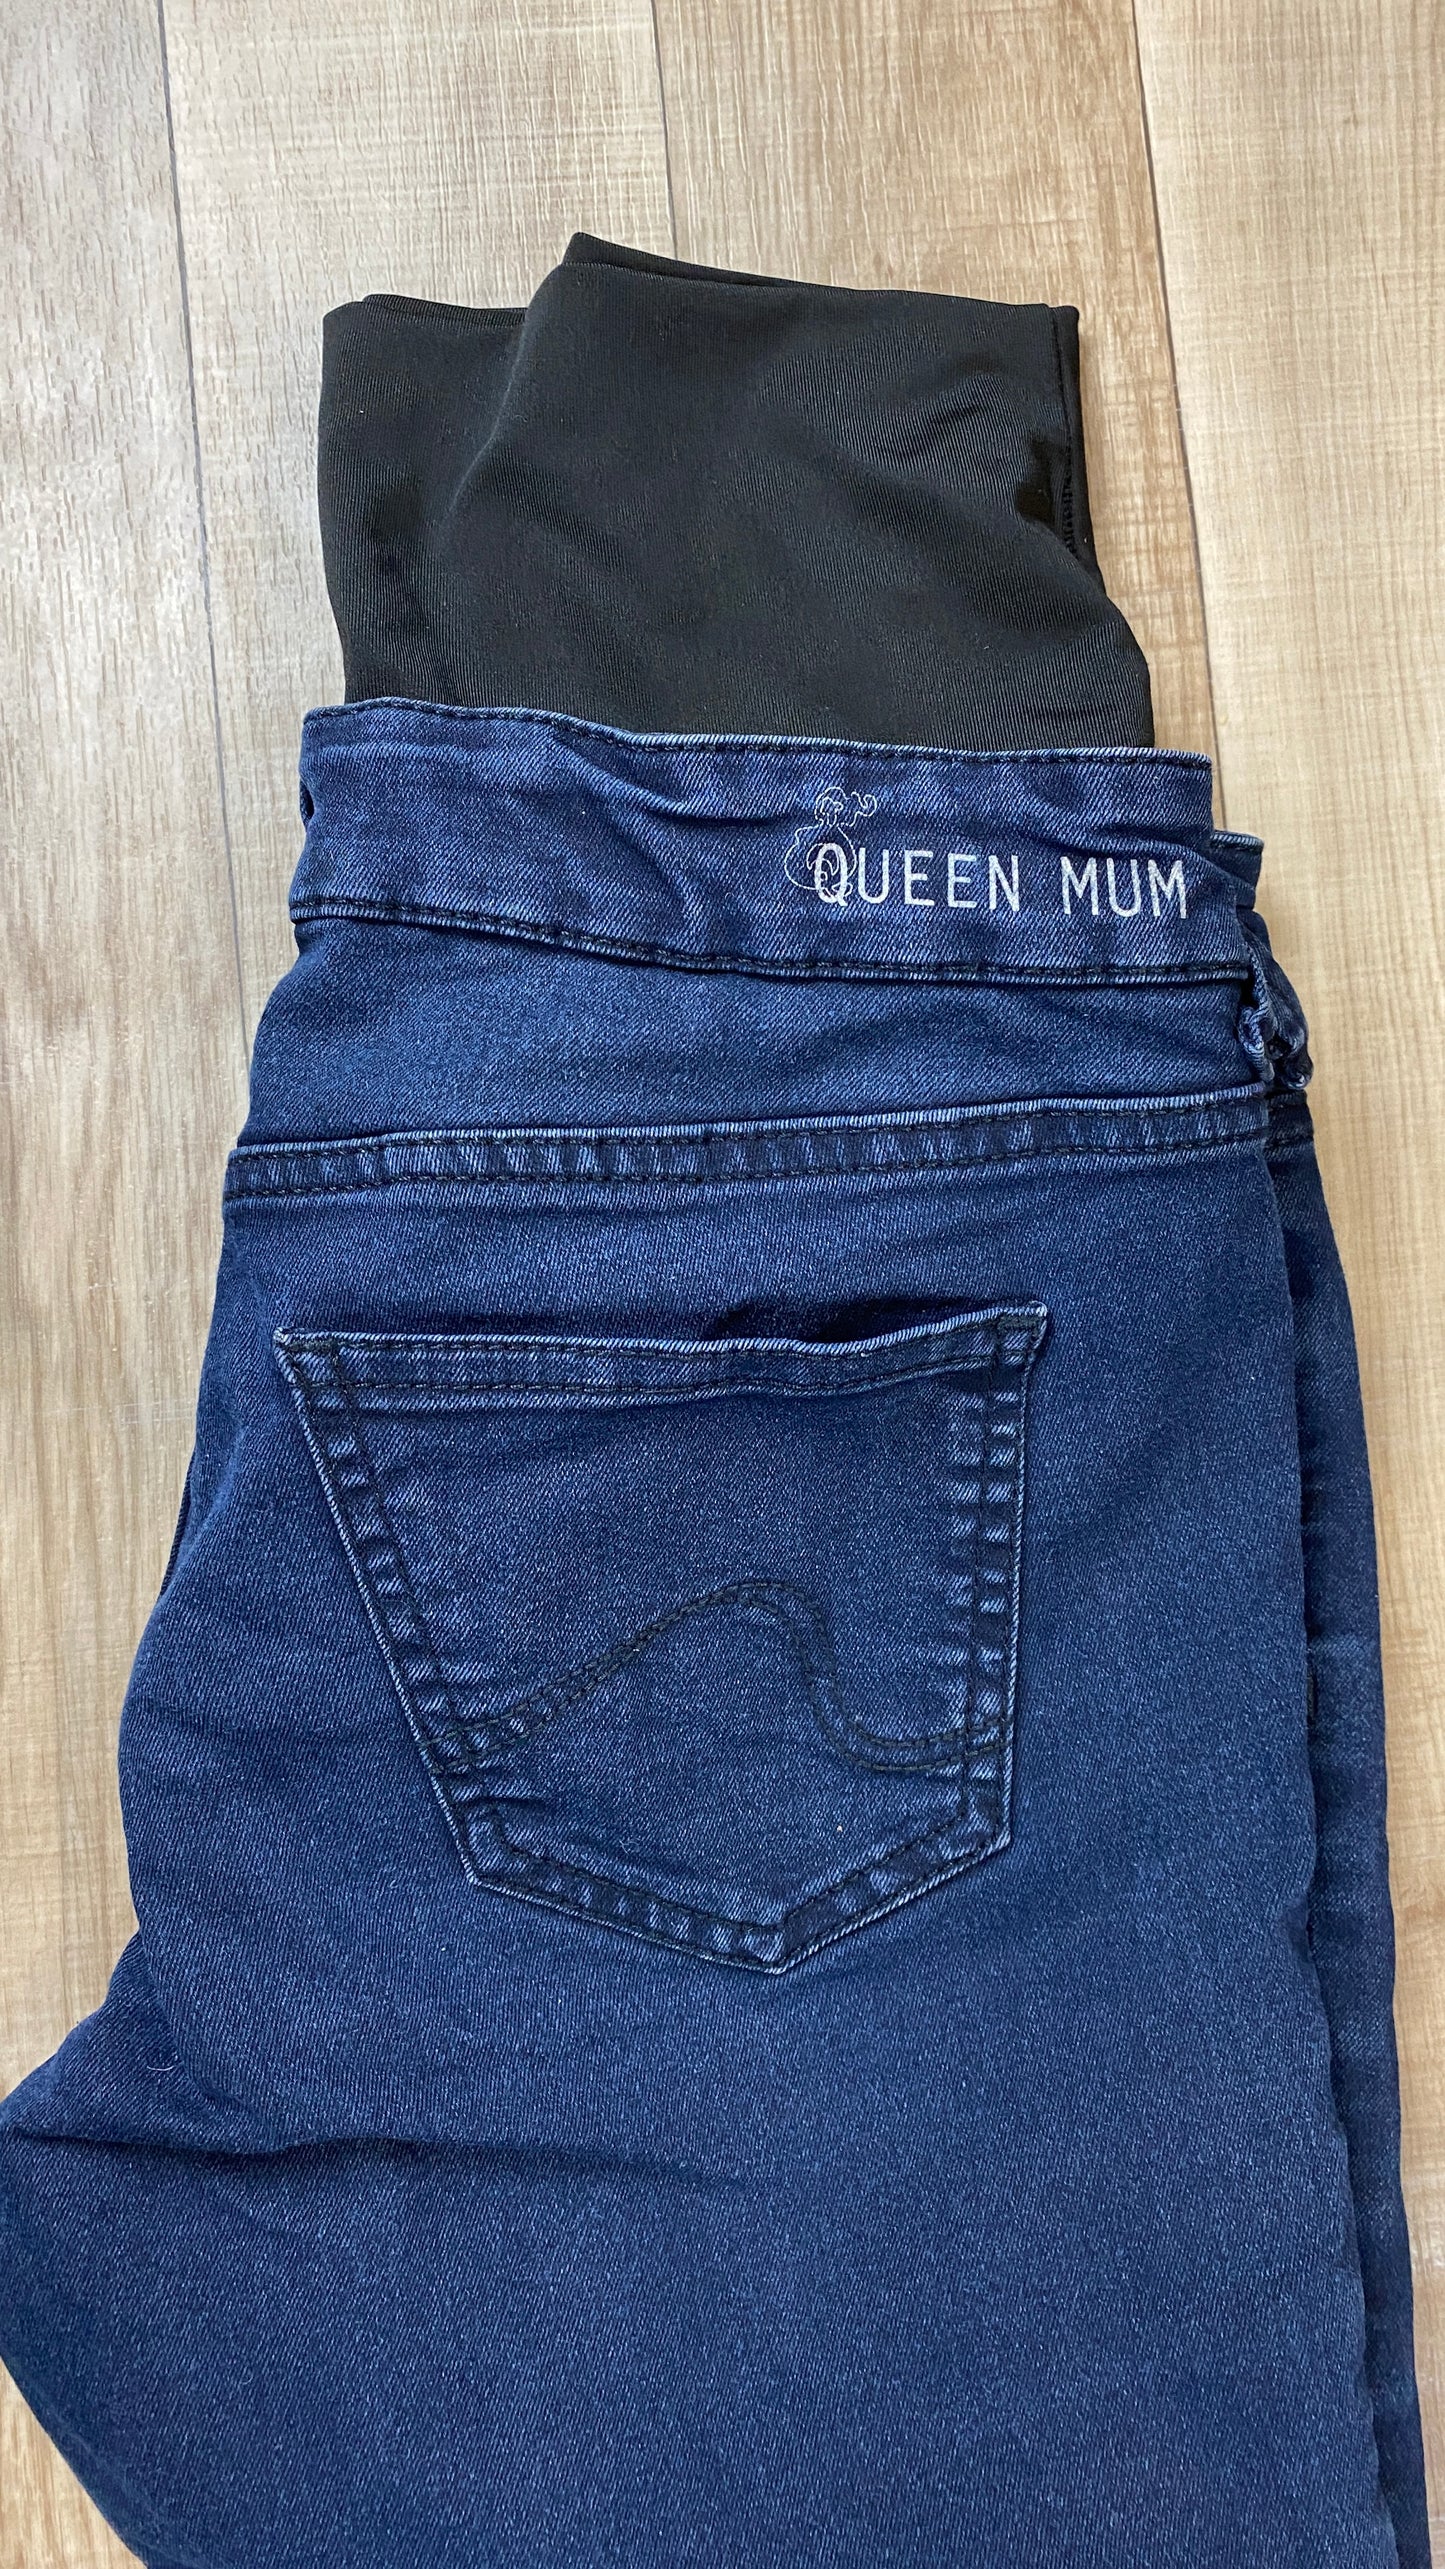 Taille 28 - Jeans Queen mum